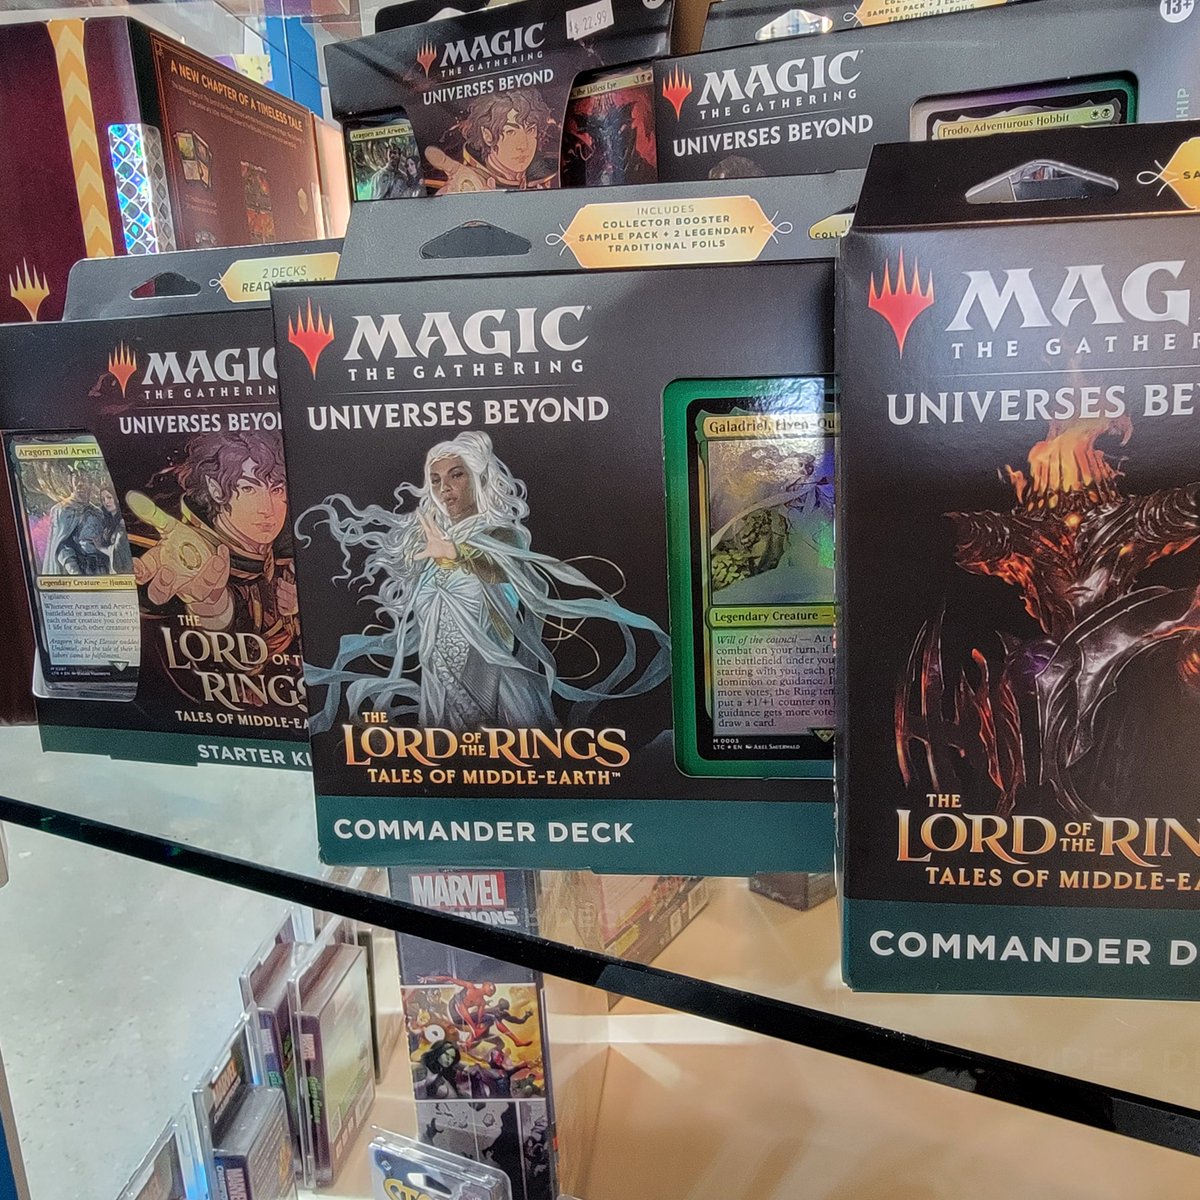 TODAY we will have all of your @wizards_magic Lord of the Rings Tales of Middle-Earth goodness. Get here ASAP so maybe you can be the one to find the 1 of 1 Ring…one card to rule them all. Who's your favorite LOTR character?
(Mine's Aragorn 🥰)

#lotr #mtg #talesofmiddleearth